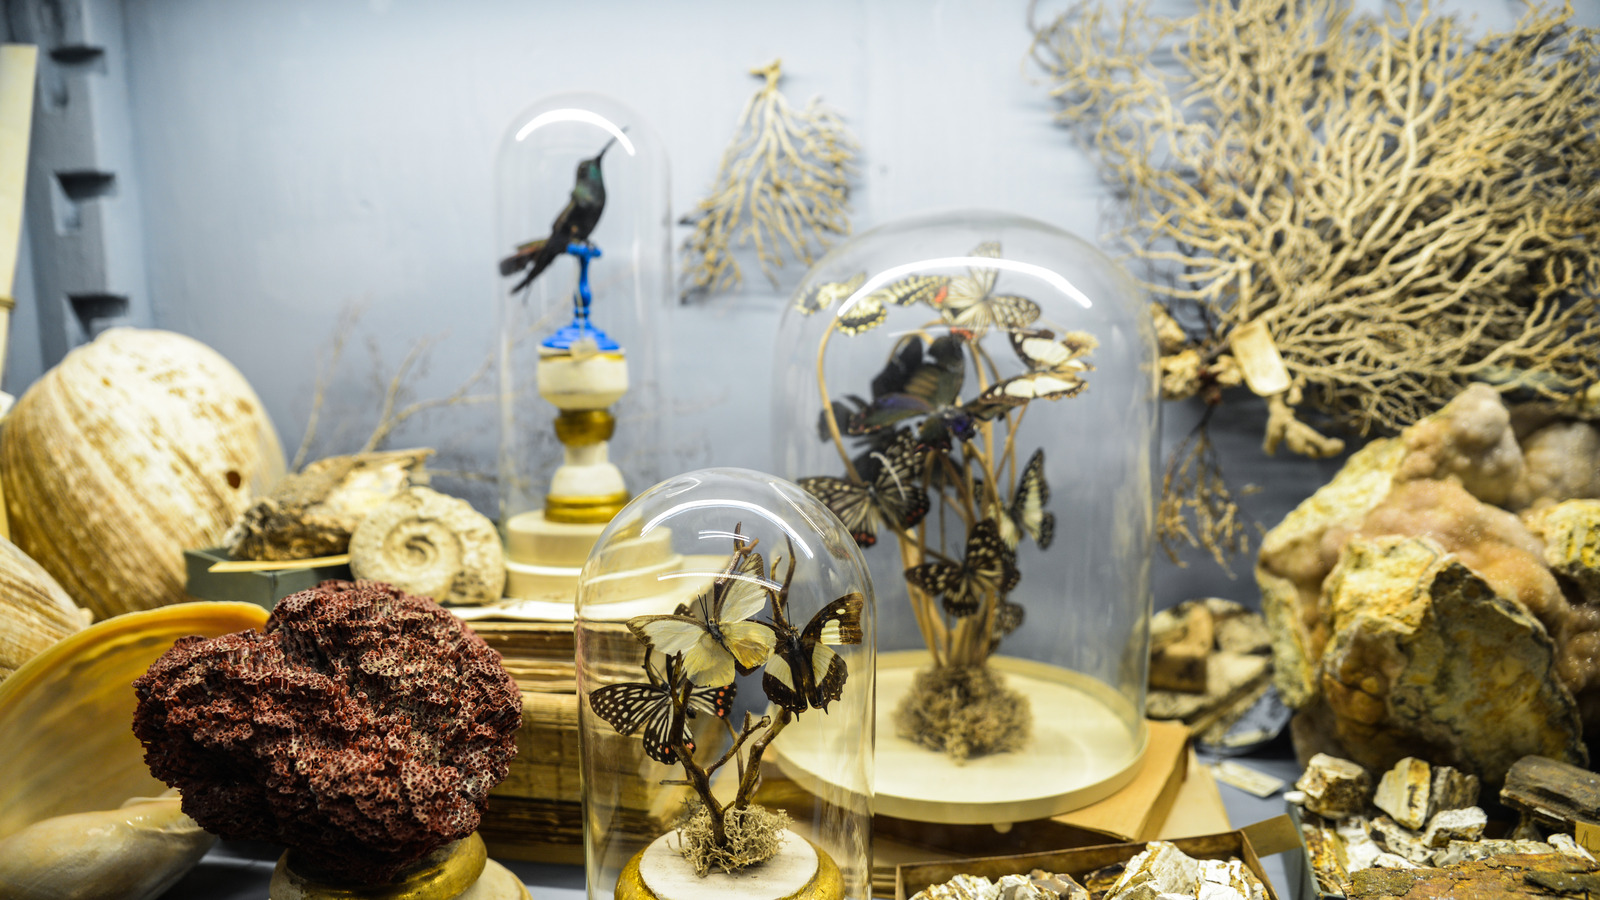 Create a Cabinet of Curiosities at your Home - The Socialite Family